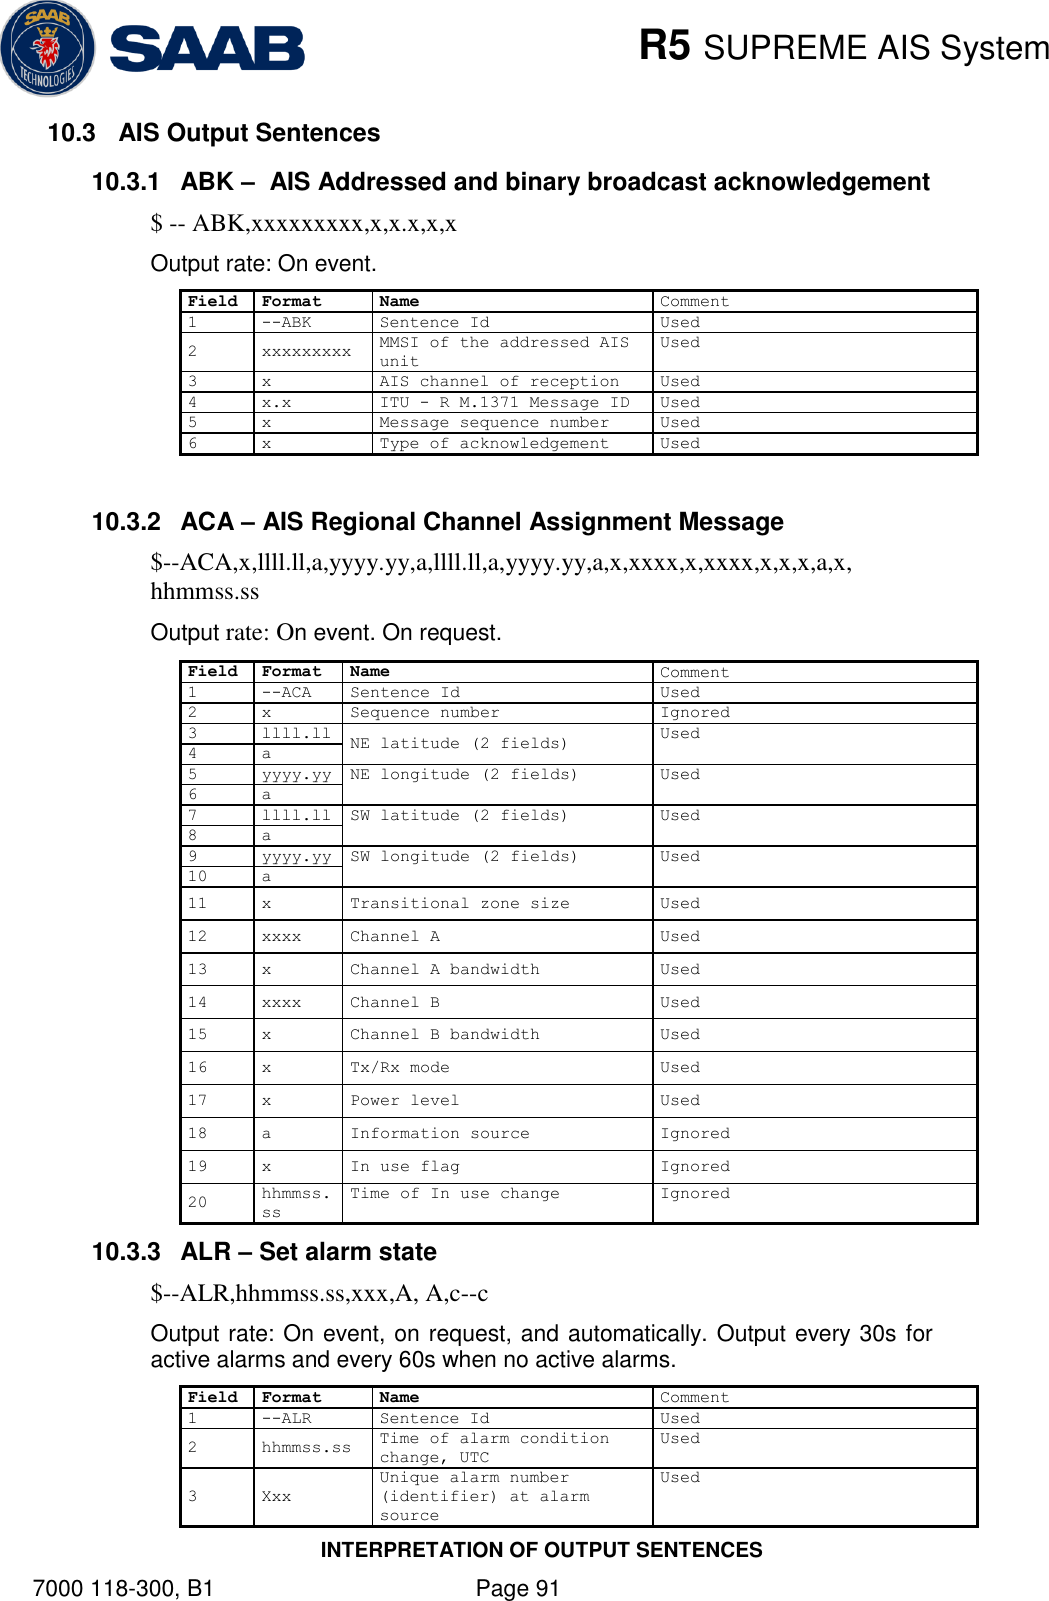    R5 SUPREME AIS System INTERPRETATION OF OUTPUT SENTENCES 7000 118-300, B1    Page 91 10.3  AIS Output Sentences 10.3.1  ABK –  AIS Addressed and binary broadcast acknowledgement $ -- ABK,xxxxxxxxx,x,x.x,x,x Output rate: On event. Field Format Name Comment 1 --ABK Sentence Id Used 2 xxxxxxxxx MMSI of the addressed AIS unit Used 3 x AIS channel of reception Used 4 x.x ITU - R M.1371 Message ID Used 5 x Message sequence number Used 6 x Type of acknowledgement Used  10.3.2  ACA – AIS Regional Channel Assignment Message $--ACA,x,llll.ll,a,yyyy.yy,a,llll.ll,a,yyyy.yy,a,x,xxxx,x,xxxx,x,x,x,a,x, hhmmss.ss Output rate: On event. On request. Field Format Name Comment 1 --ACA Sentence Id Used 2 x Sequence number Ignored 3 llll.ll NE latitude (2 fields) Used 4 a 5 yyyy.yy NE longitude (2 fields) Used 6 a 7 llll.ll SW latitude (2 fields) Used 8 a 9 yyyy.yy SW longitude (2 fields) Used 10 a 11 x Transitional zone size Used 12 xxxx Channel A Used 13 x Channel A bandwidth Used 14 xxxx Channel B Used 15 x Channel B bandwidth Used 16 x Tx/Rx mode Used 17 x Power level Used 18 a Information source Ignored 19 x In use flag Ignored 20 hhmmss.ss Time of In use change Ignored 10.3.3  ALR – Set alarm state $--ALR,hhmmss.ss,xxx,A, A,c--c Output rate: On event, on request, and automatically. Output every 30s for active alarms and every 60s when no active alarms. Field Format Name Comment 1 --ALR Sentence Id Used 2 hhmmss.ss Time of alarm condition change, UTC Used 3 Xxx Unique alarm number (identifier) at alarm source Used 